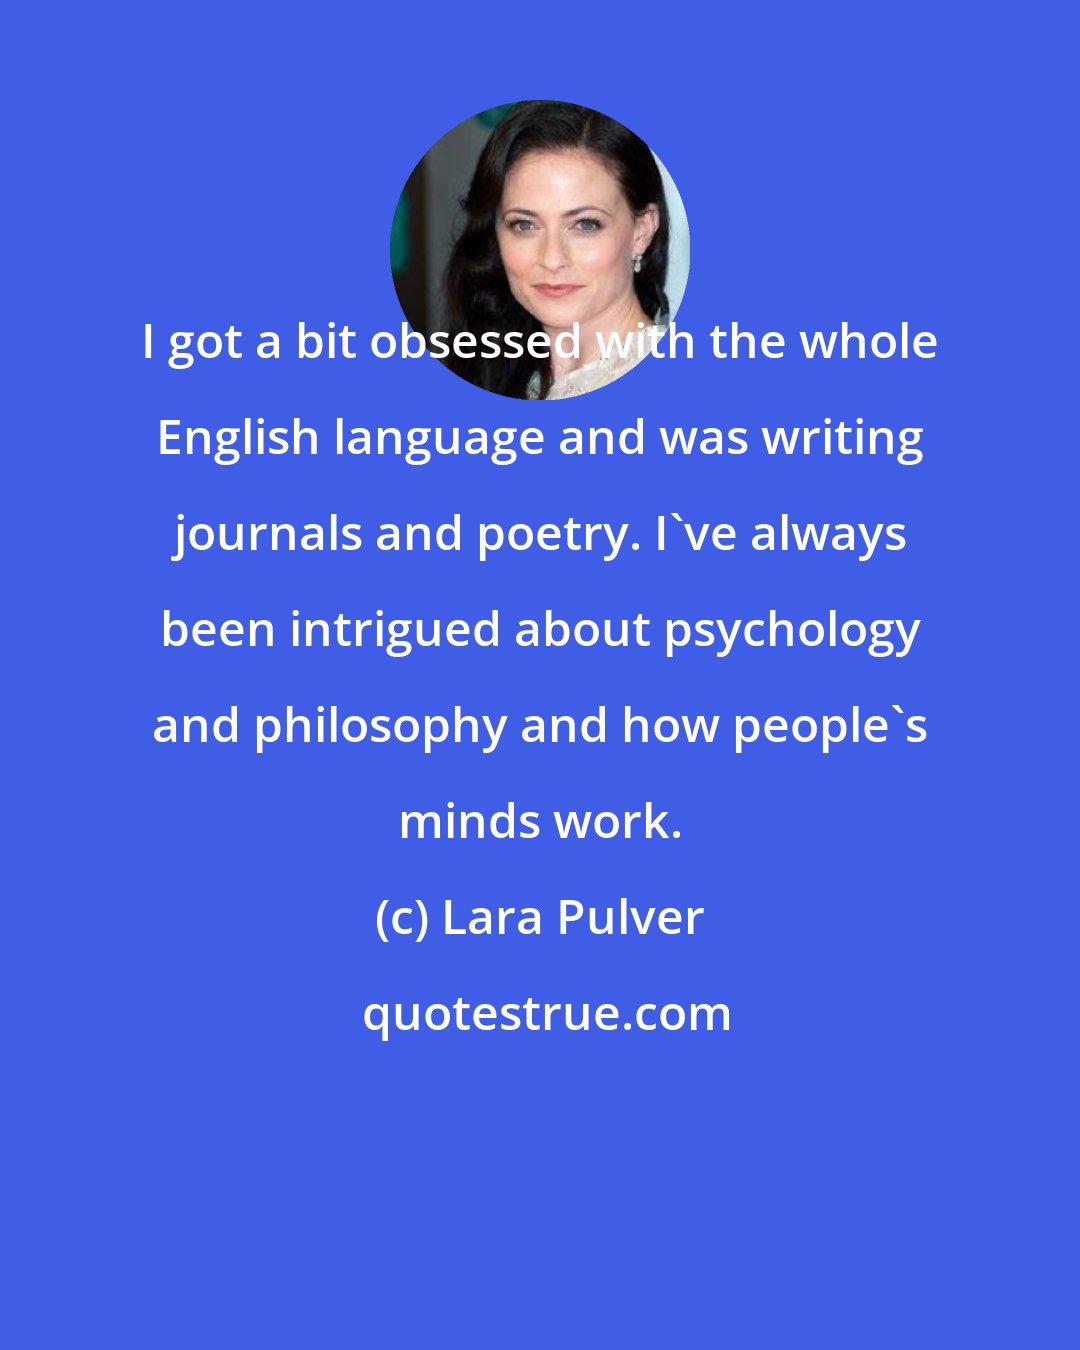 Lara Pulver: I got a bit obsessed with the whole English language and was writing journals and poetry. I've always been intrigued about psychology and philosophy and how people's minds work.